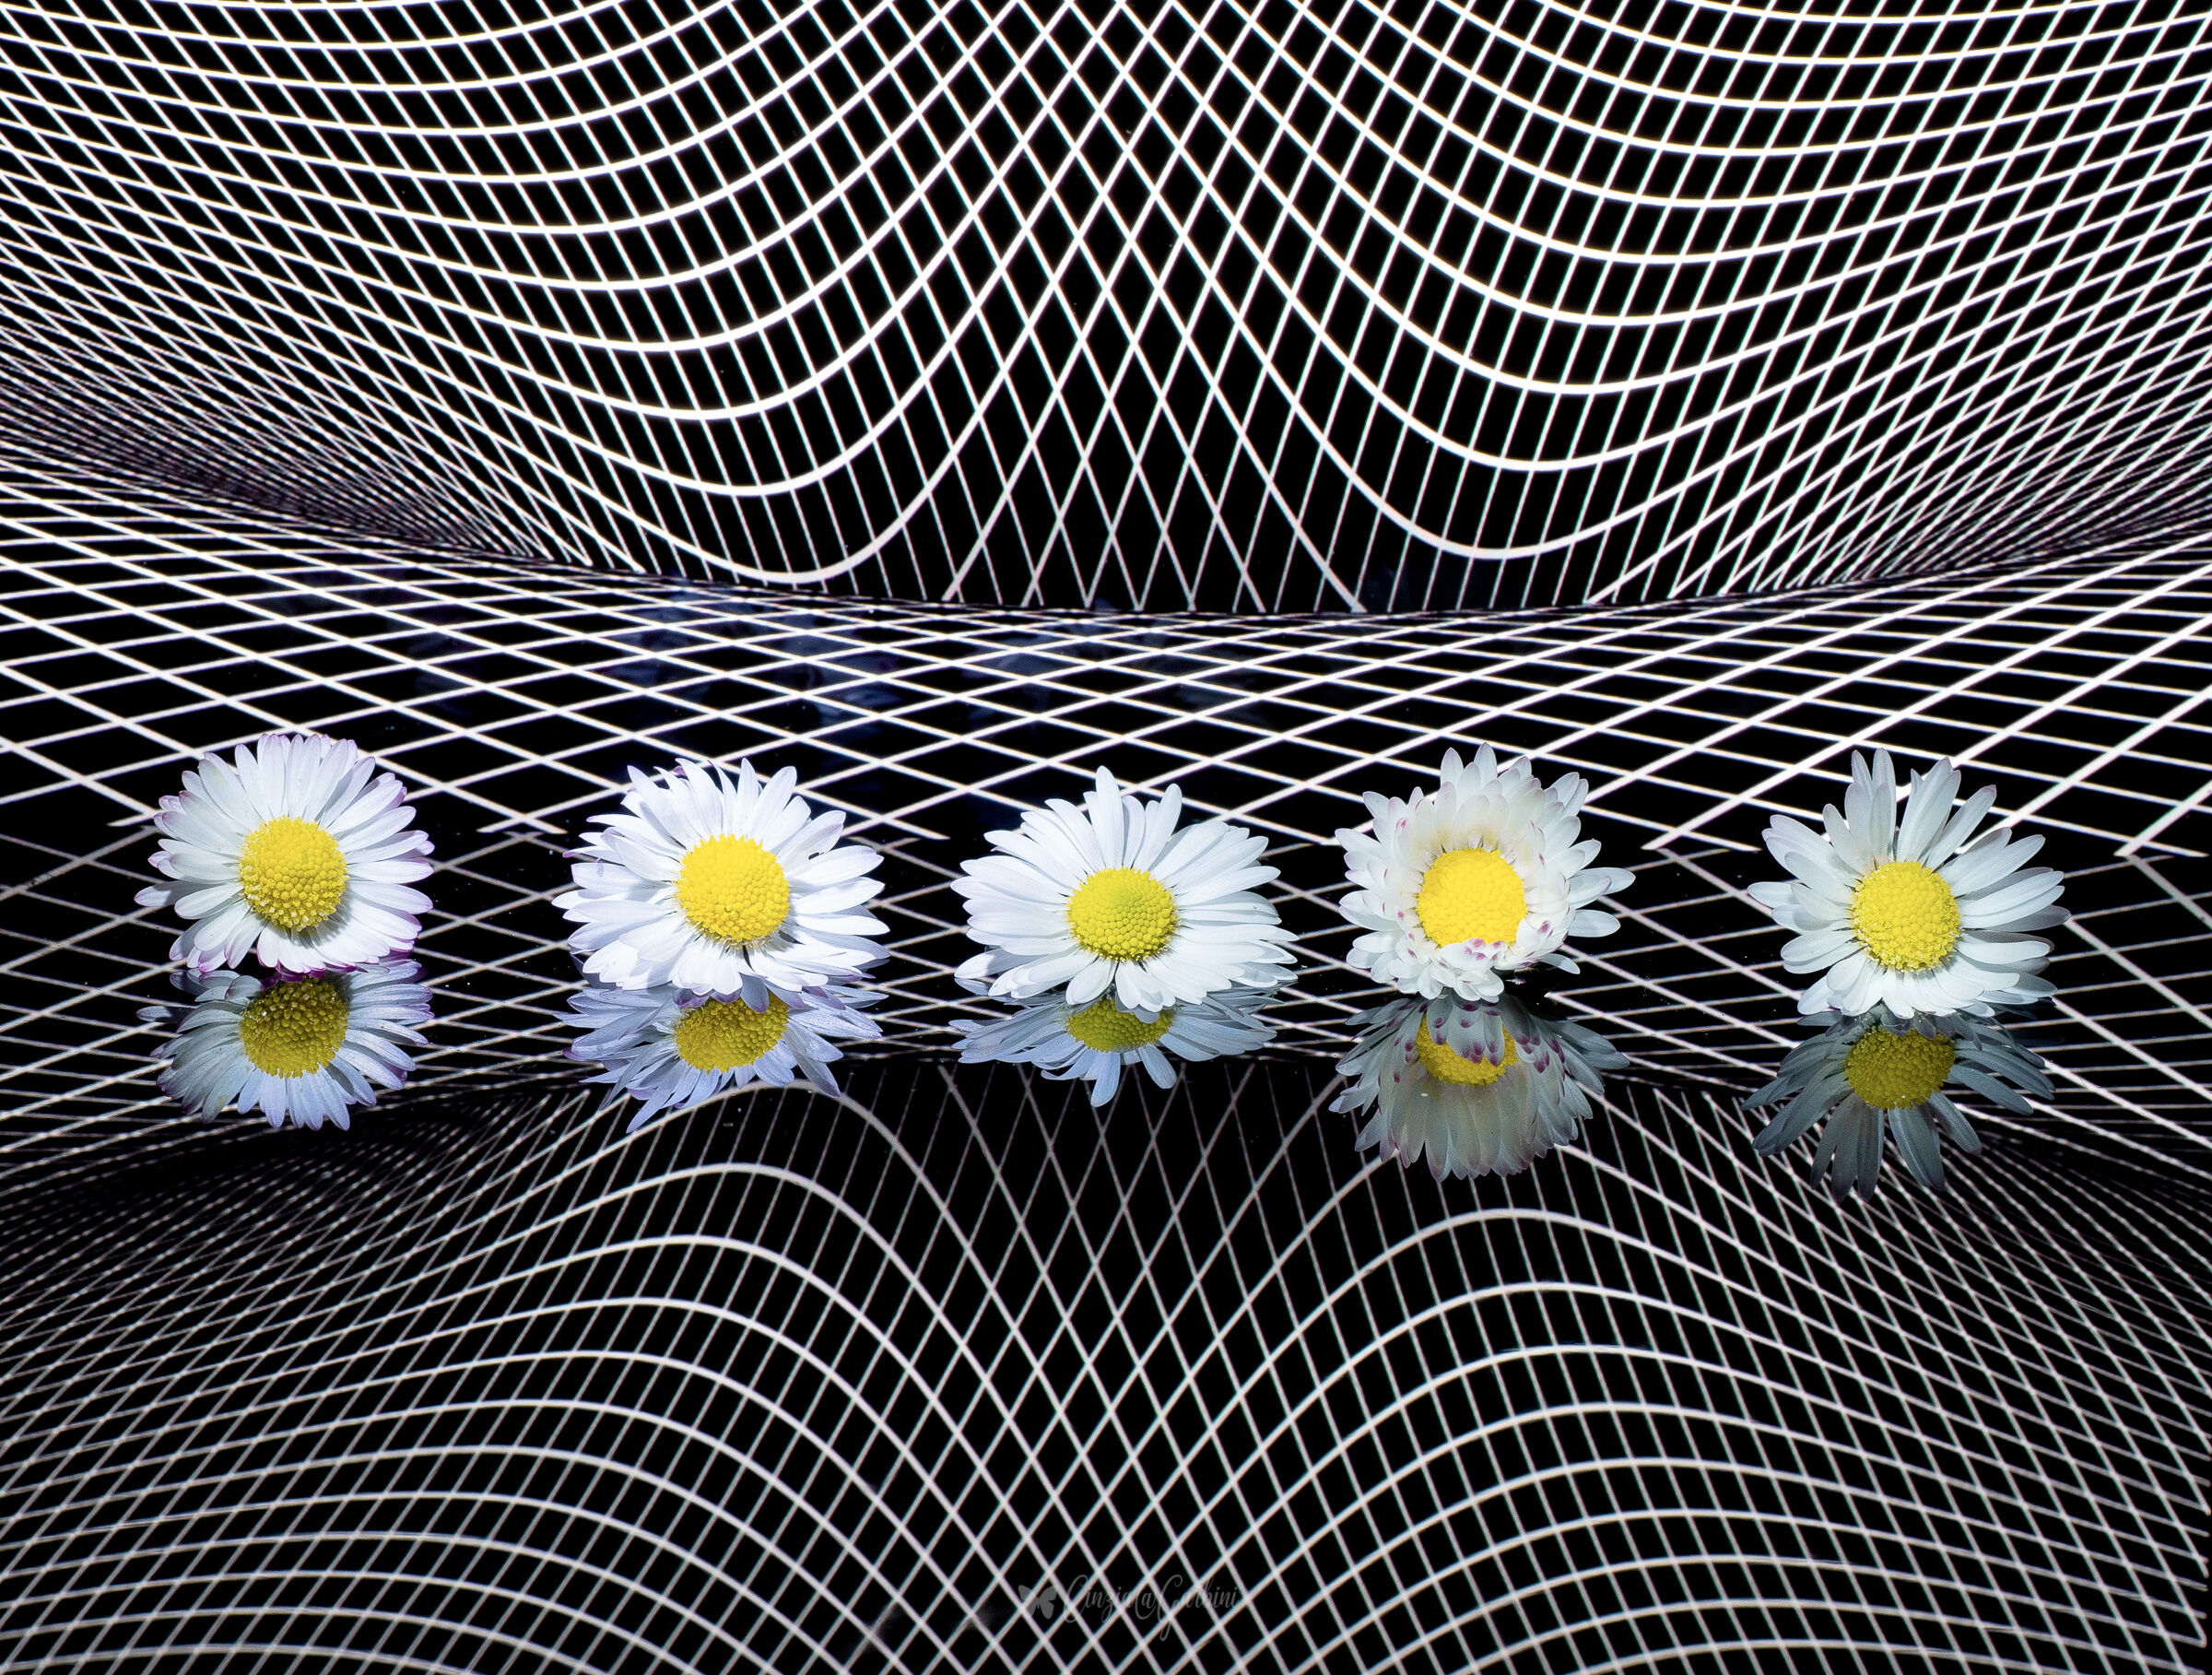 daisies in the net...